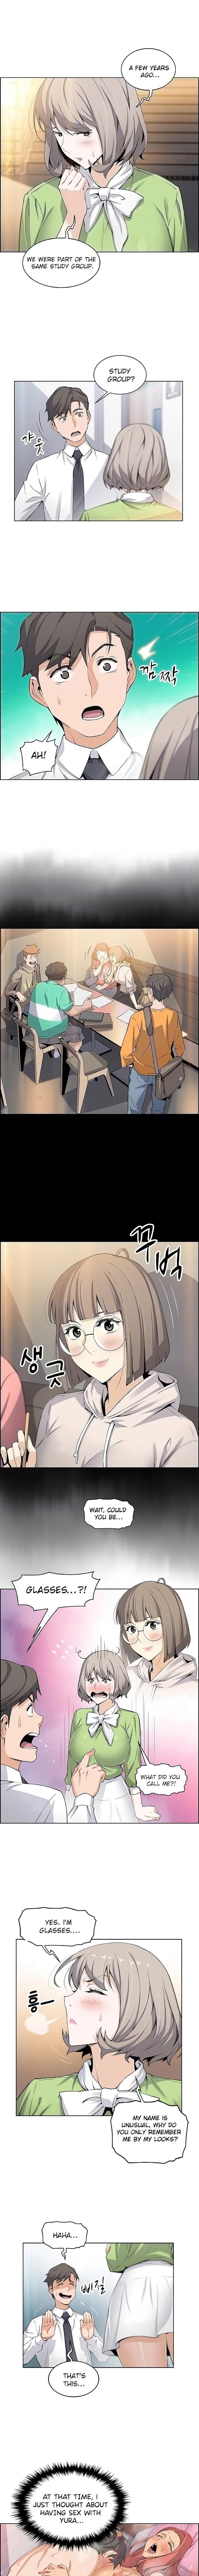 Housekeeper [Neck Pillow, Paper] Ch.49/49 [English] [Manhwa PDF] Completed 153